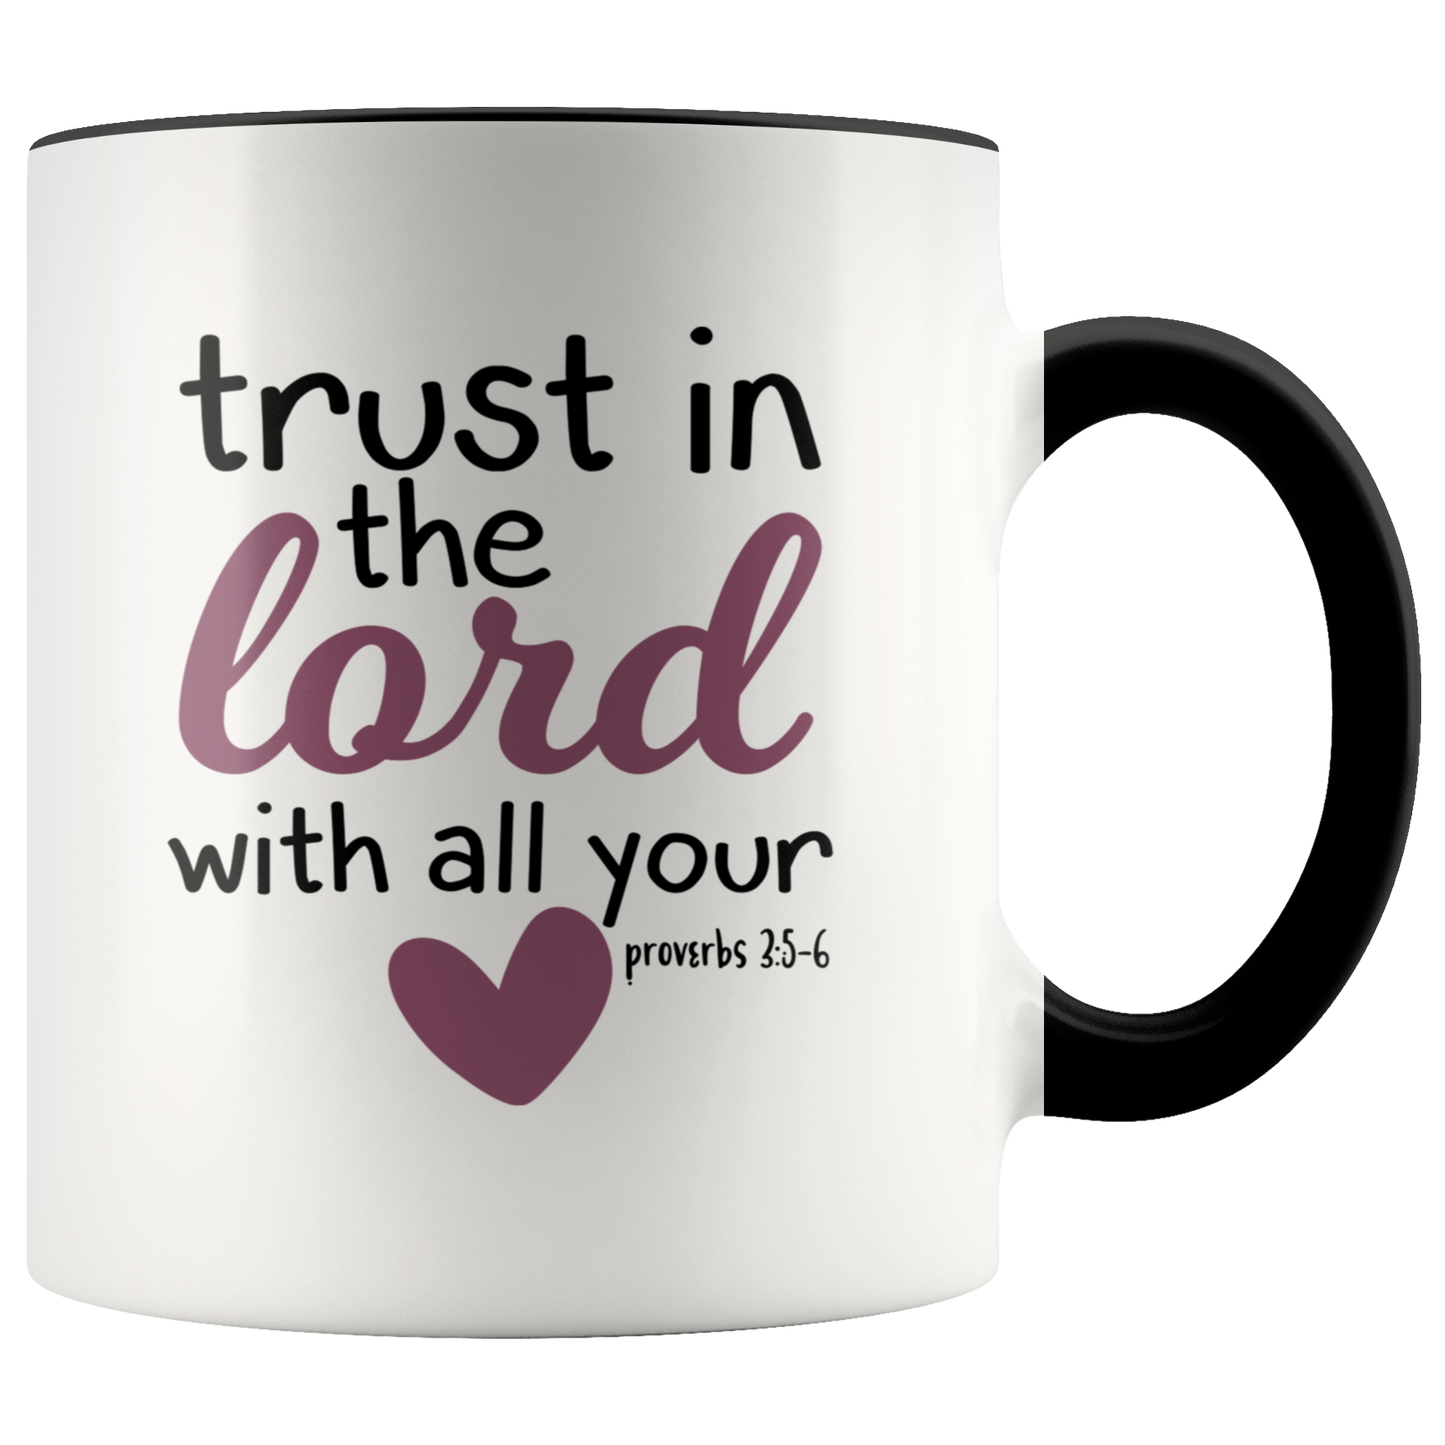 Christian coffee mug gift Trust in the Lord Religious mug Inspirational Faith quote cup